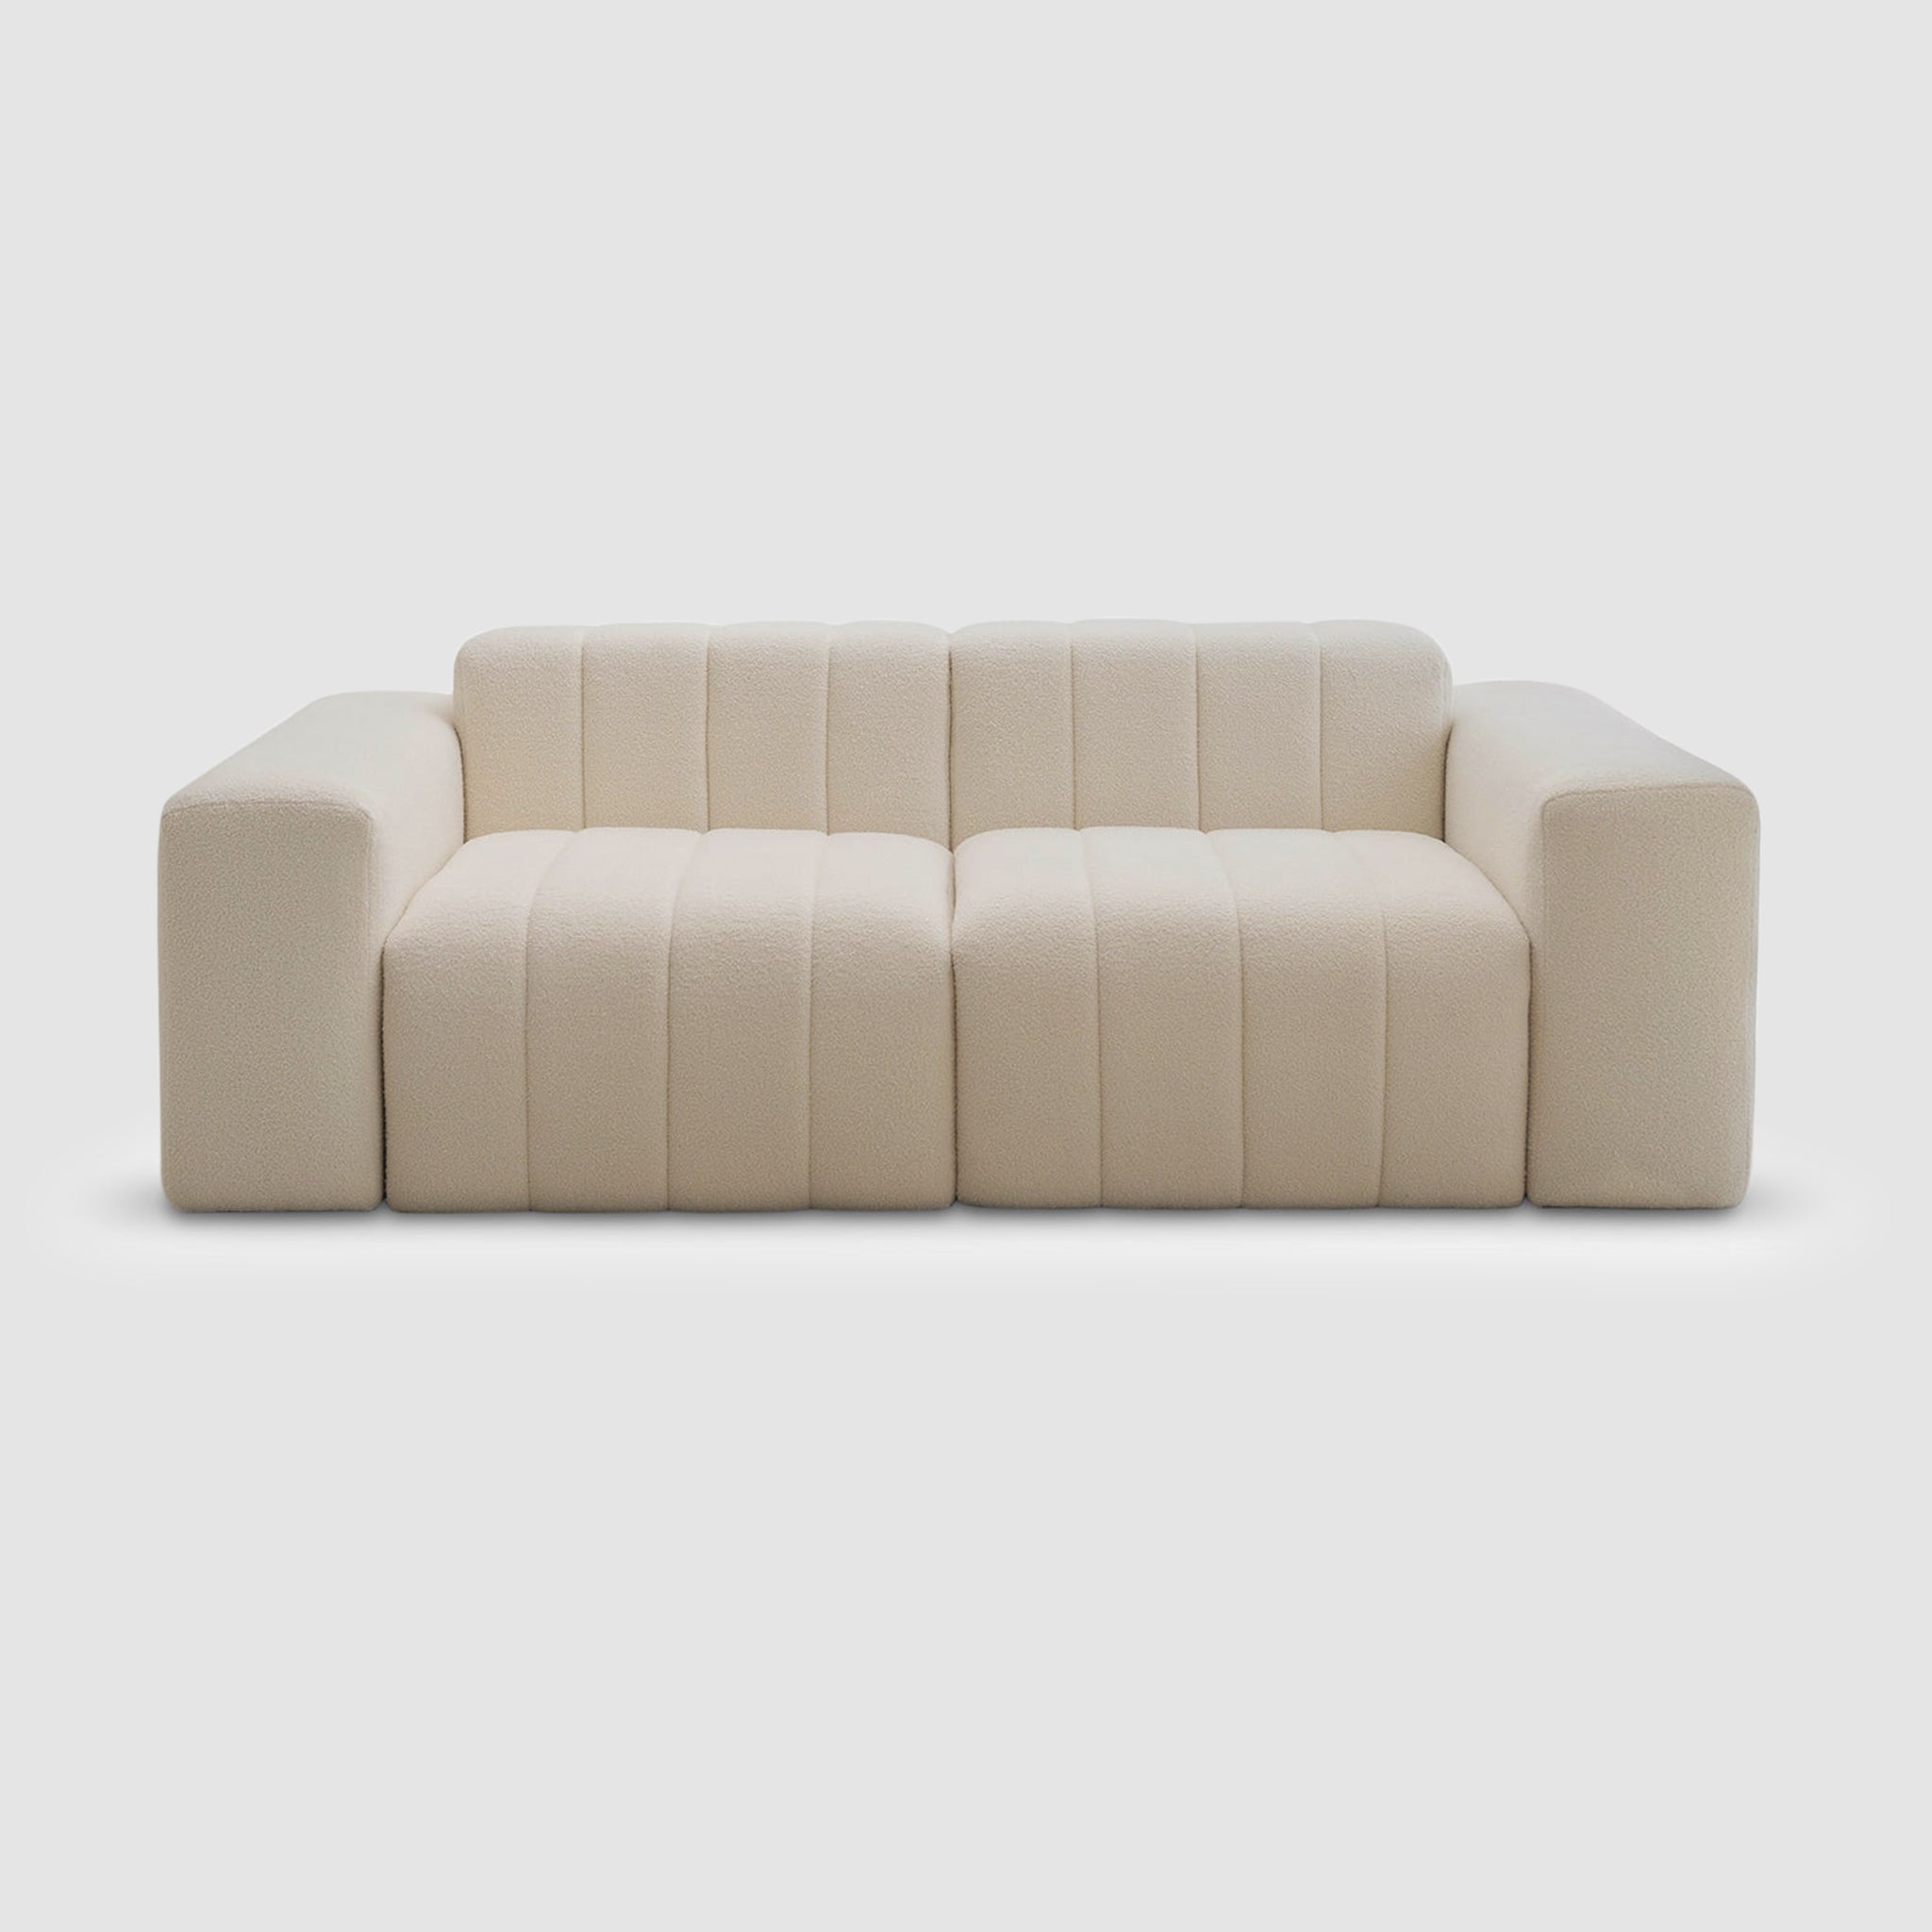 White modern couch on a white background. This could be the Klein Sofa by Klettkic.